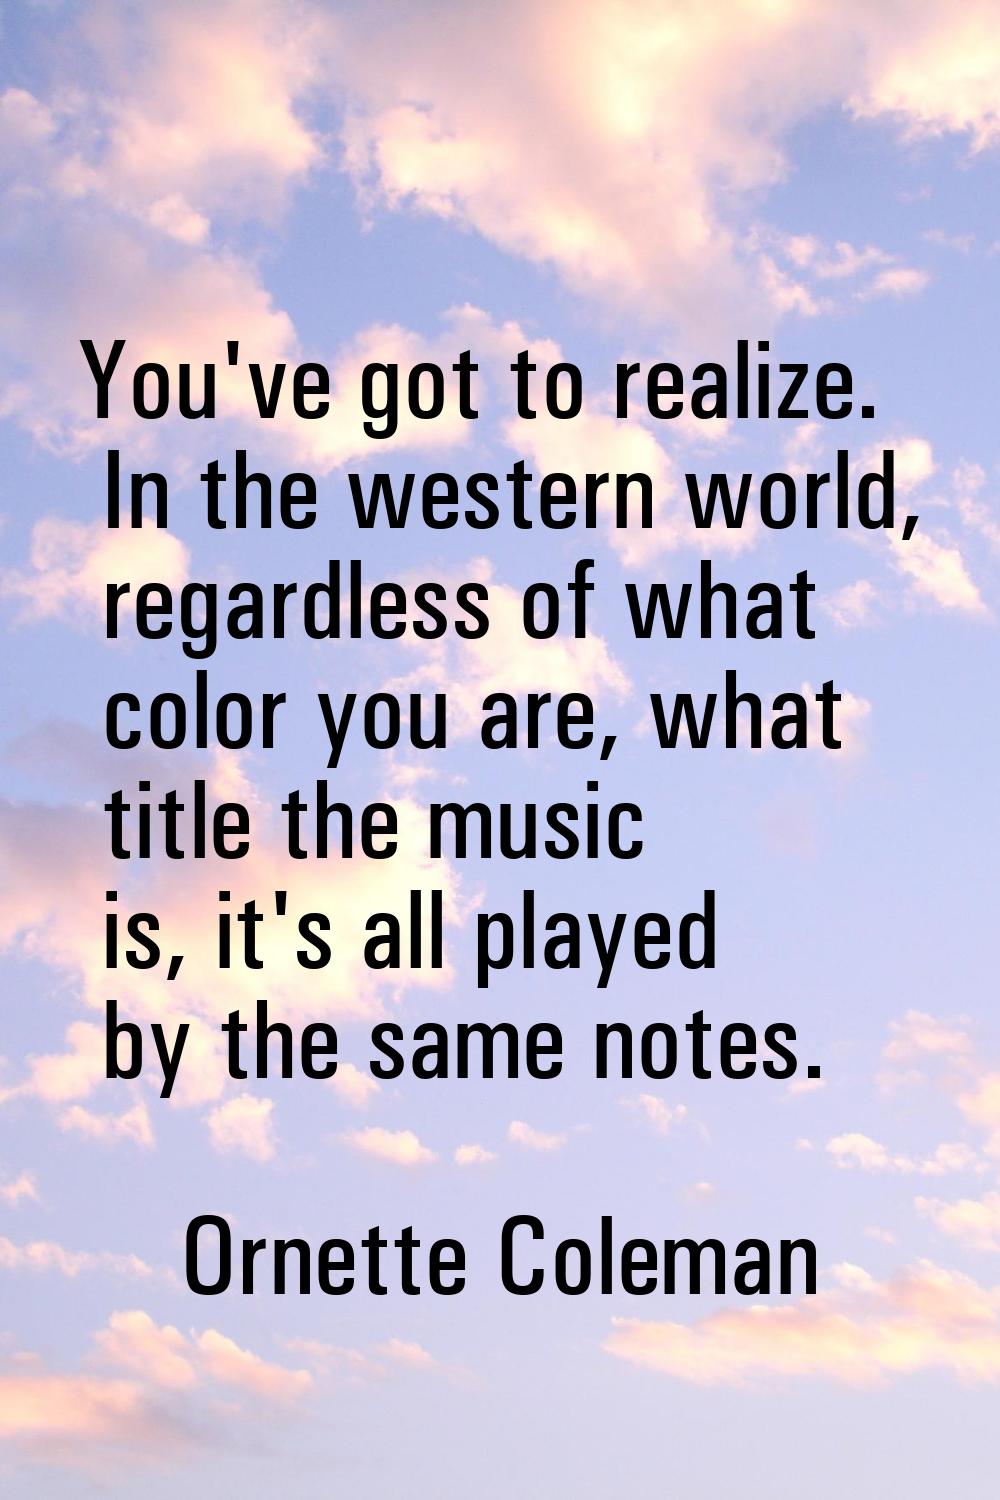 You've got to realize. In the western world, regardless of what color you are, what title the music